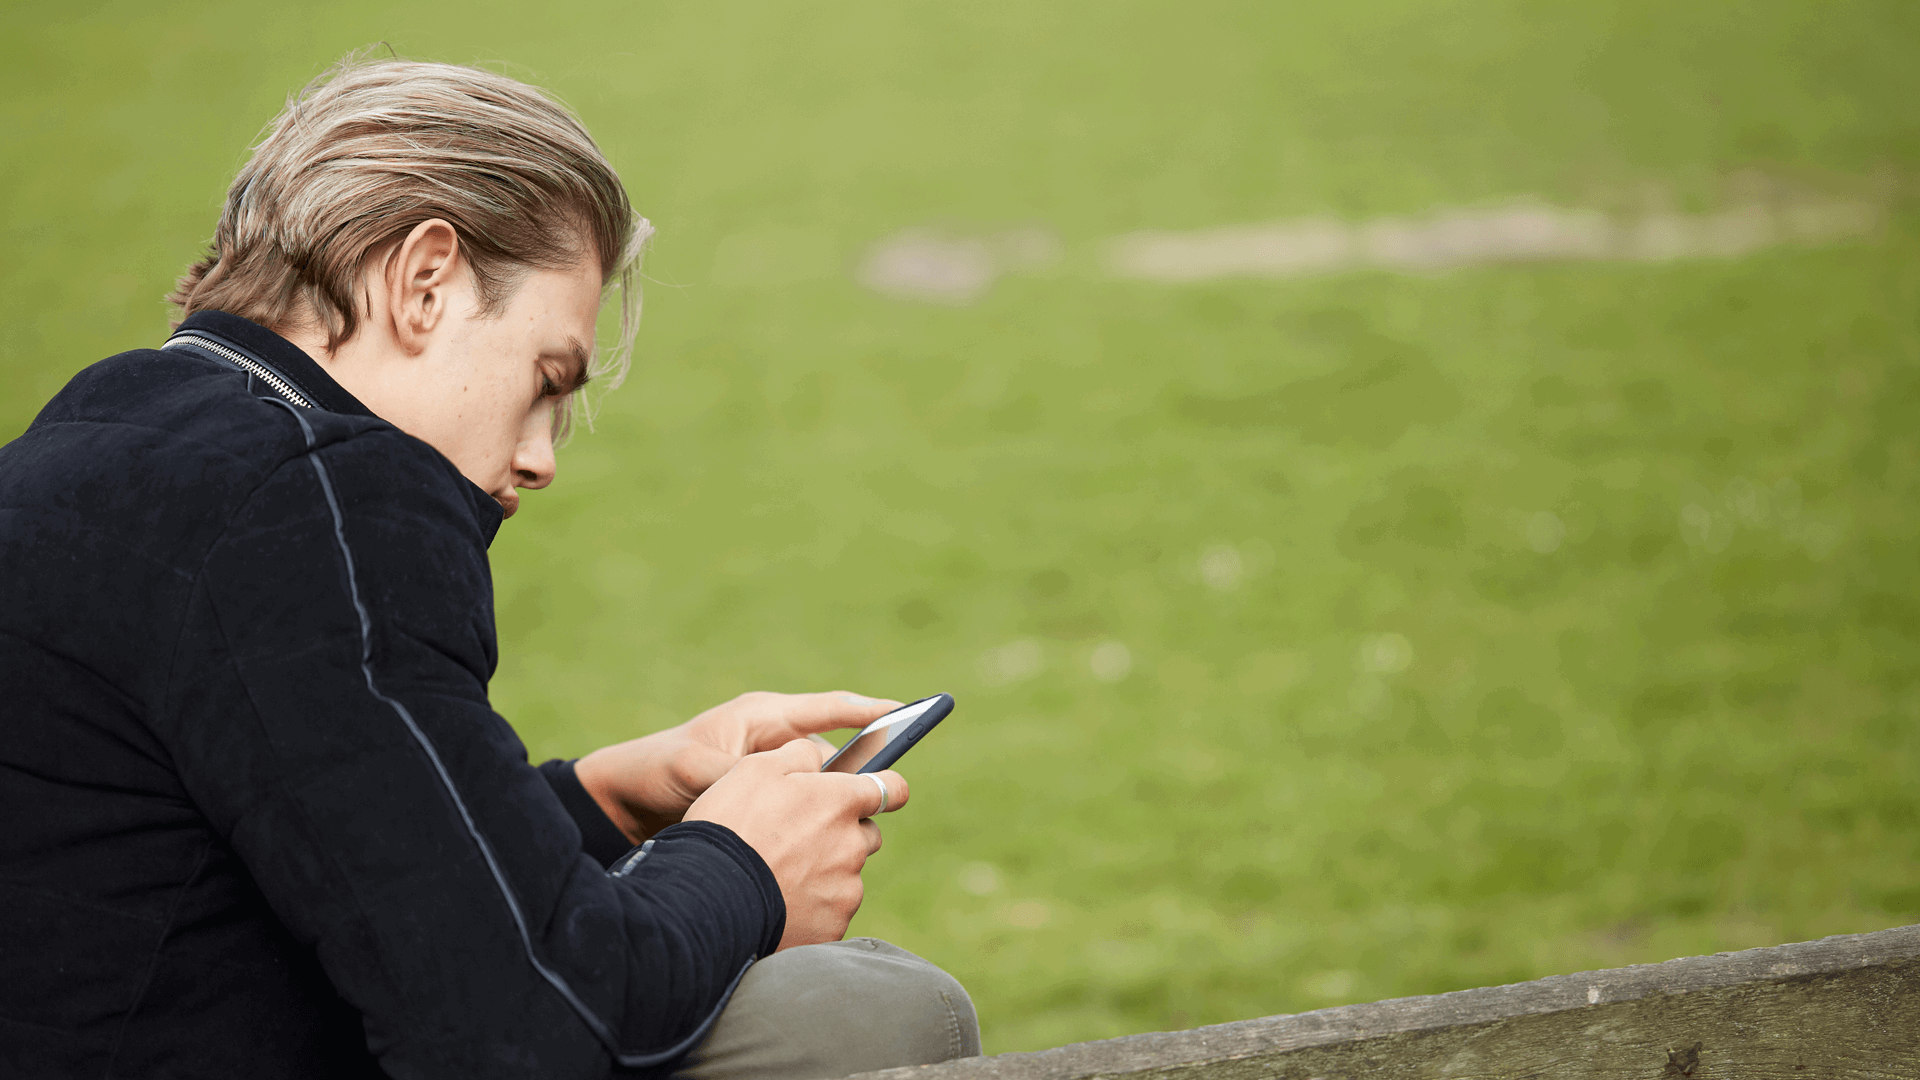 side view close up of a boy wearing black jacket looking at his phone while sitting on a bench in a park